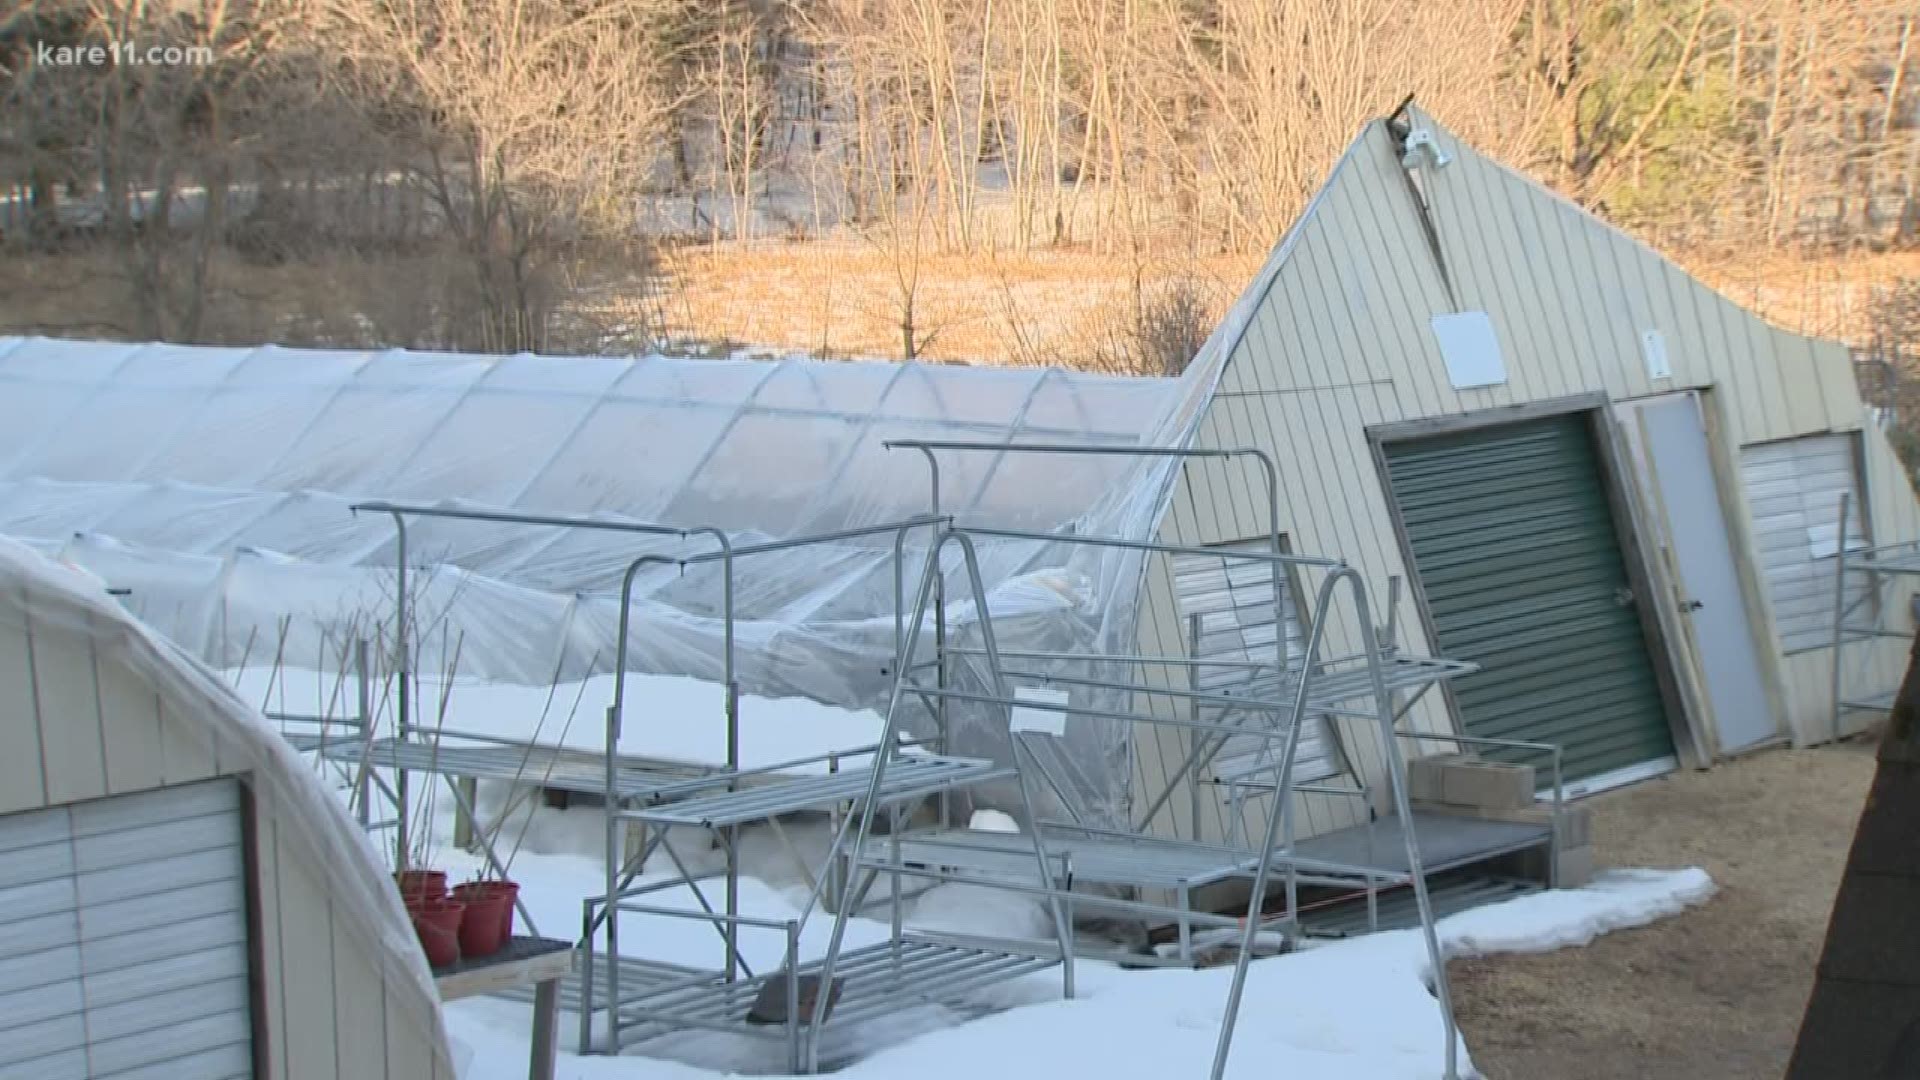 A crushing mix of rain and snow brought down two greenhouses and the dreams of a 19-year-old horticulturist.